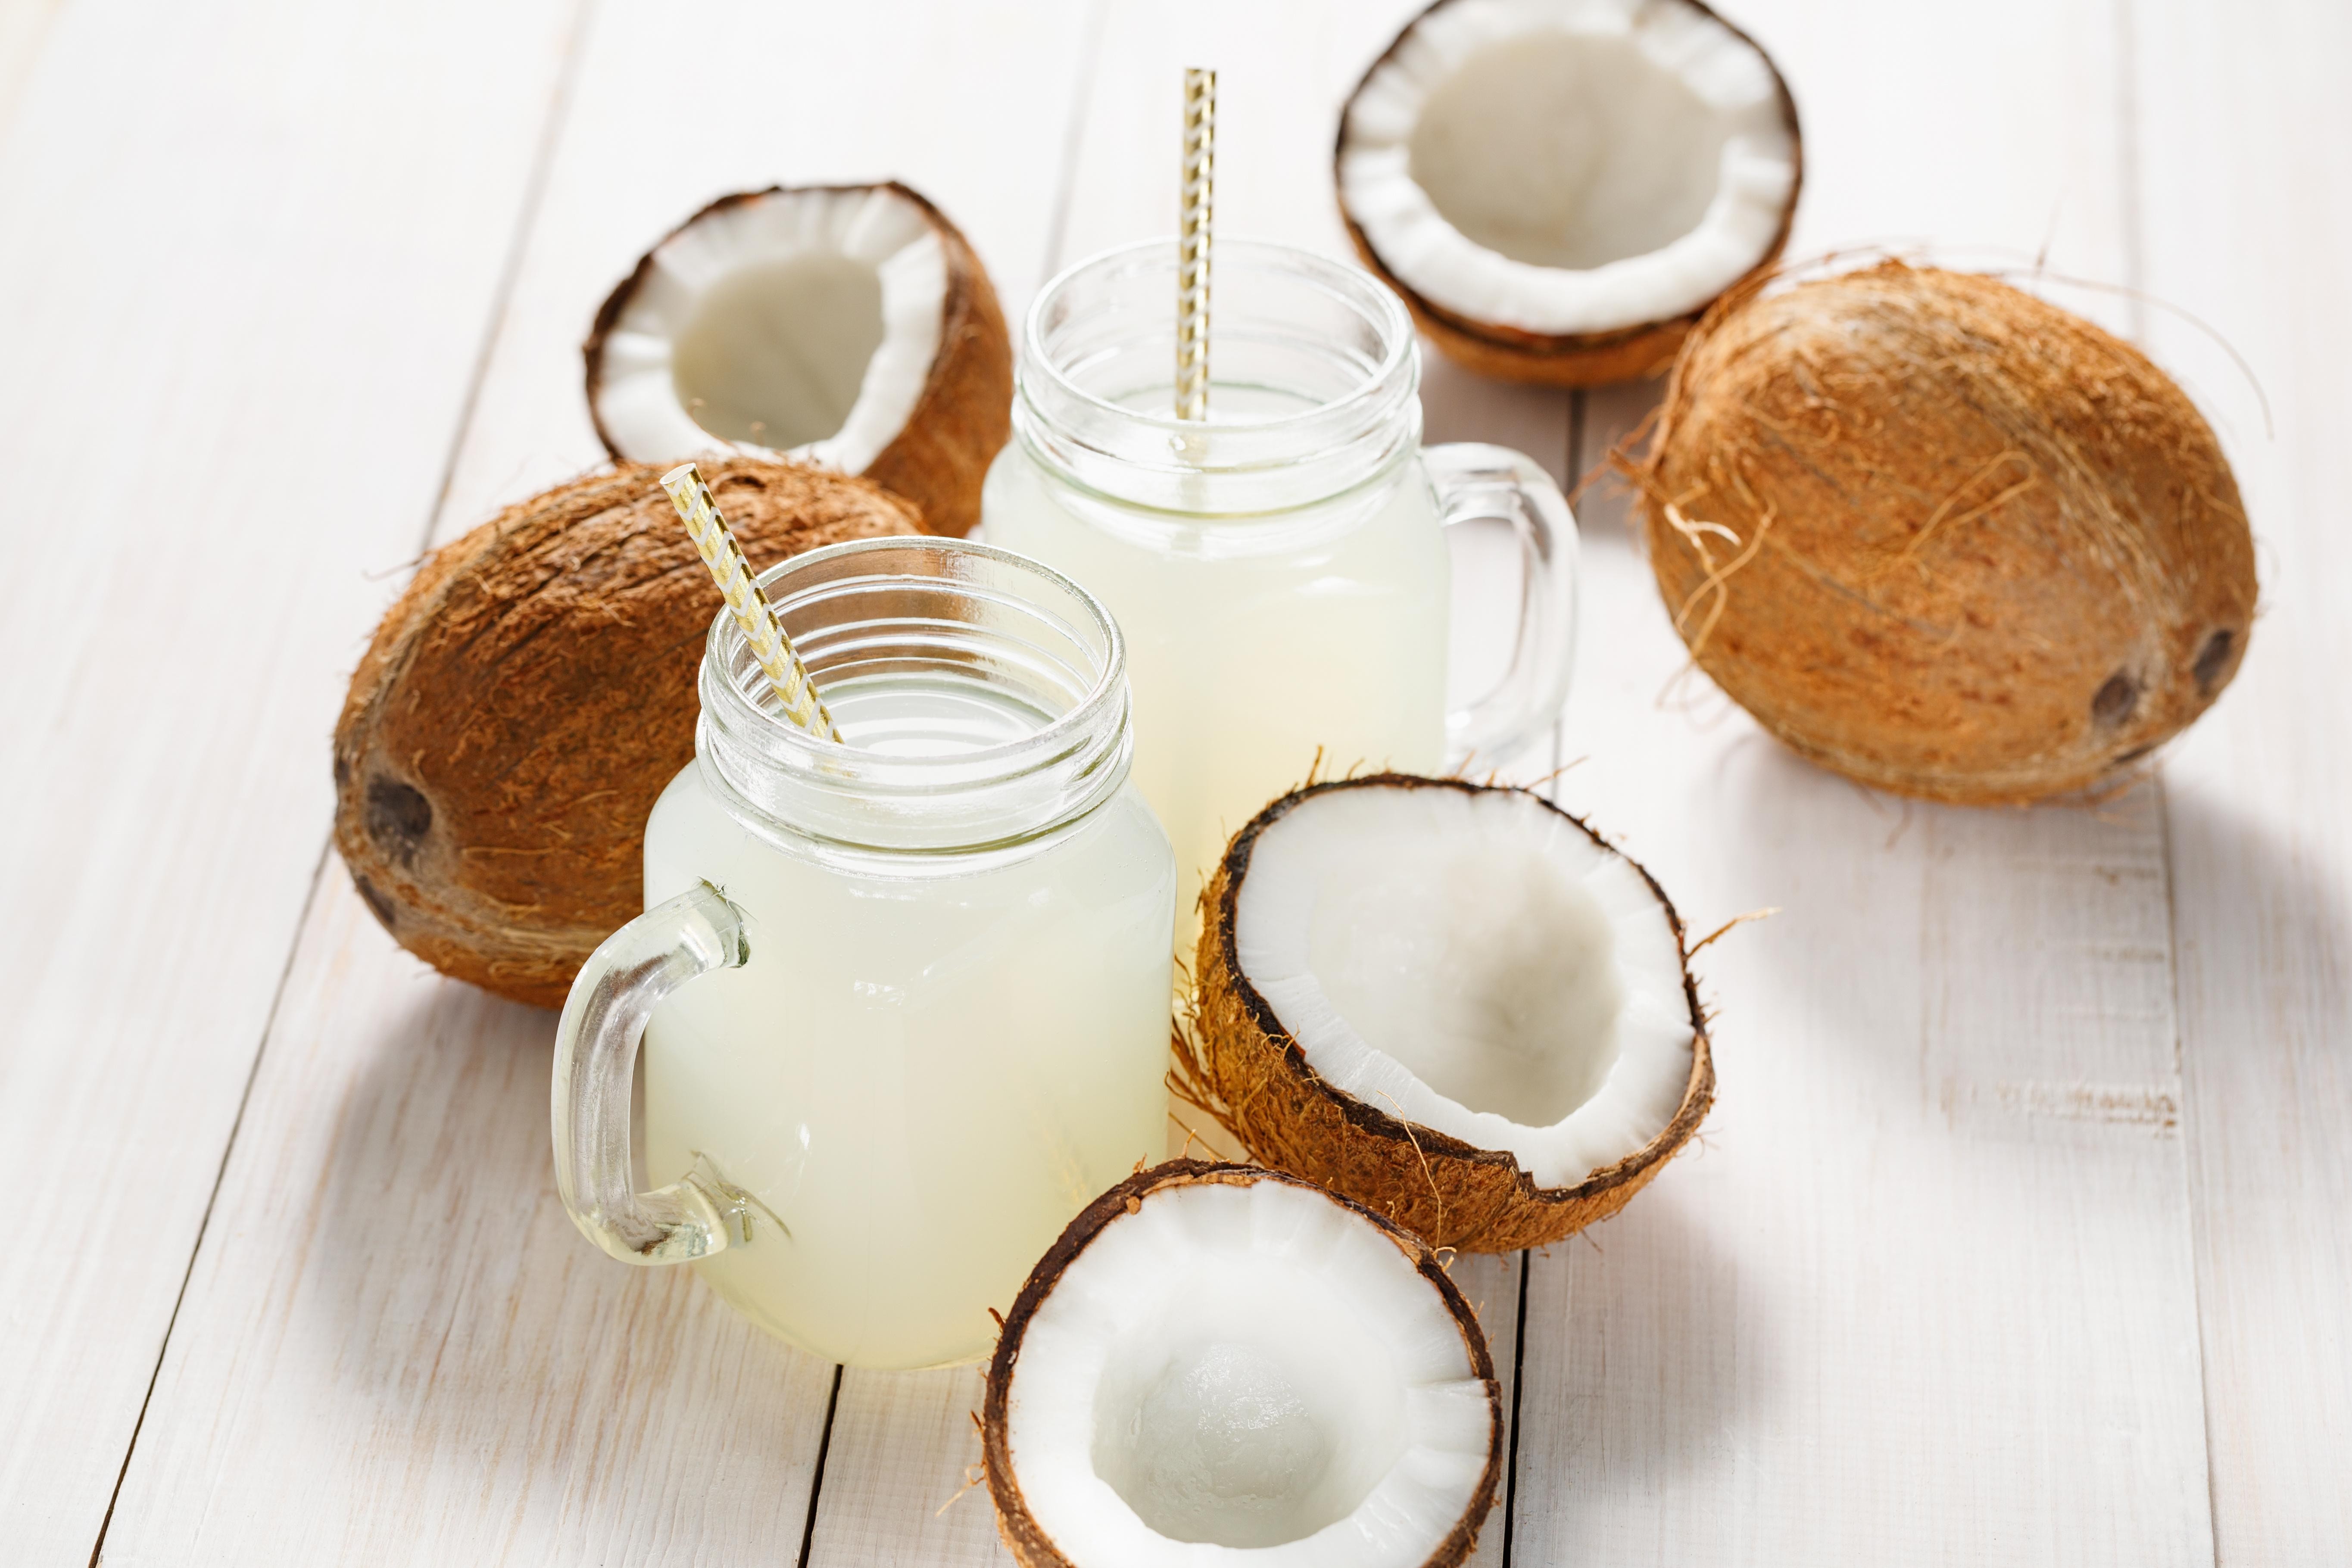 D7 - YOUNG COCONUT JUICE